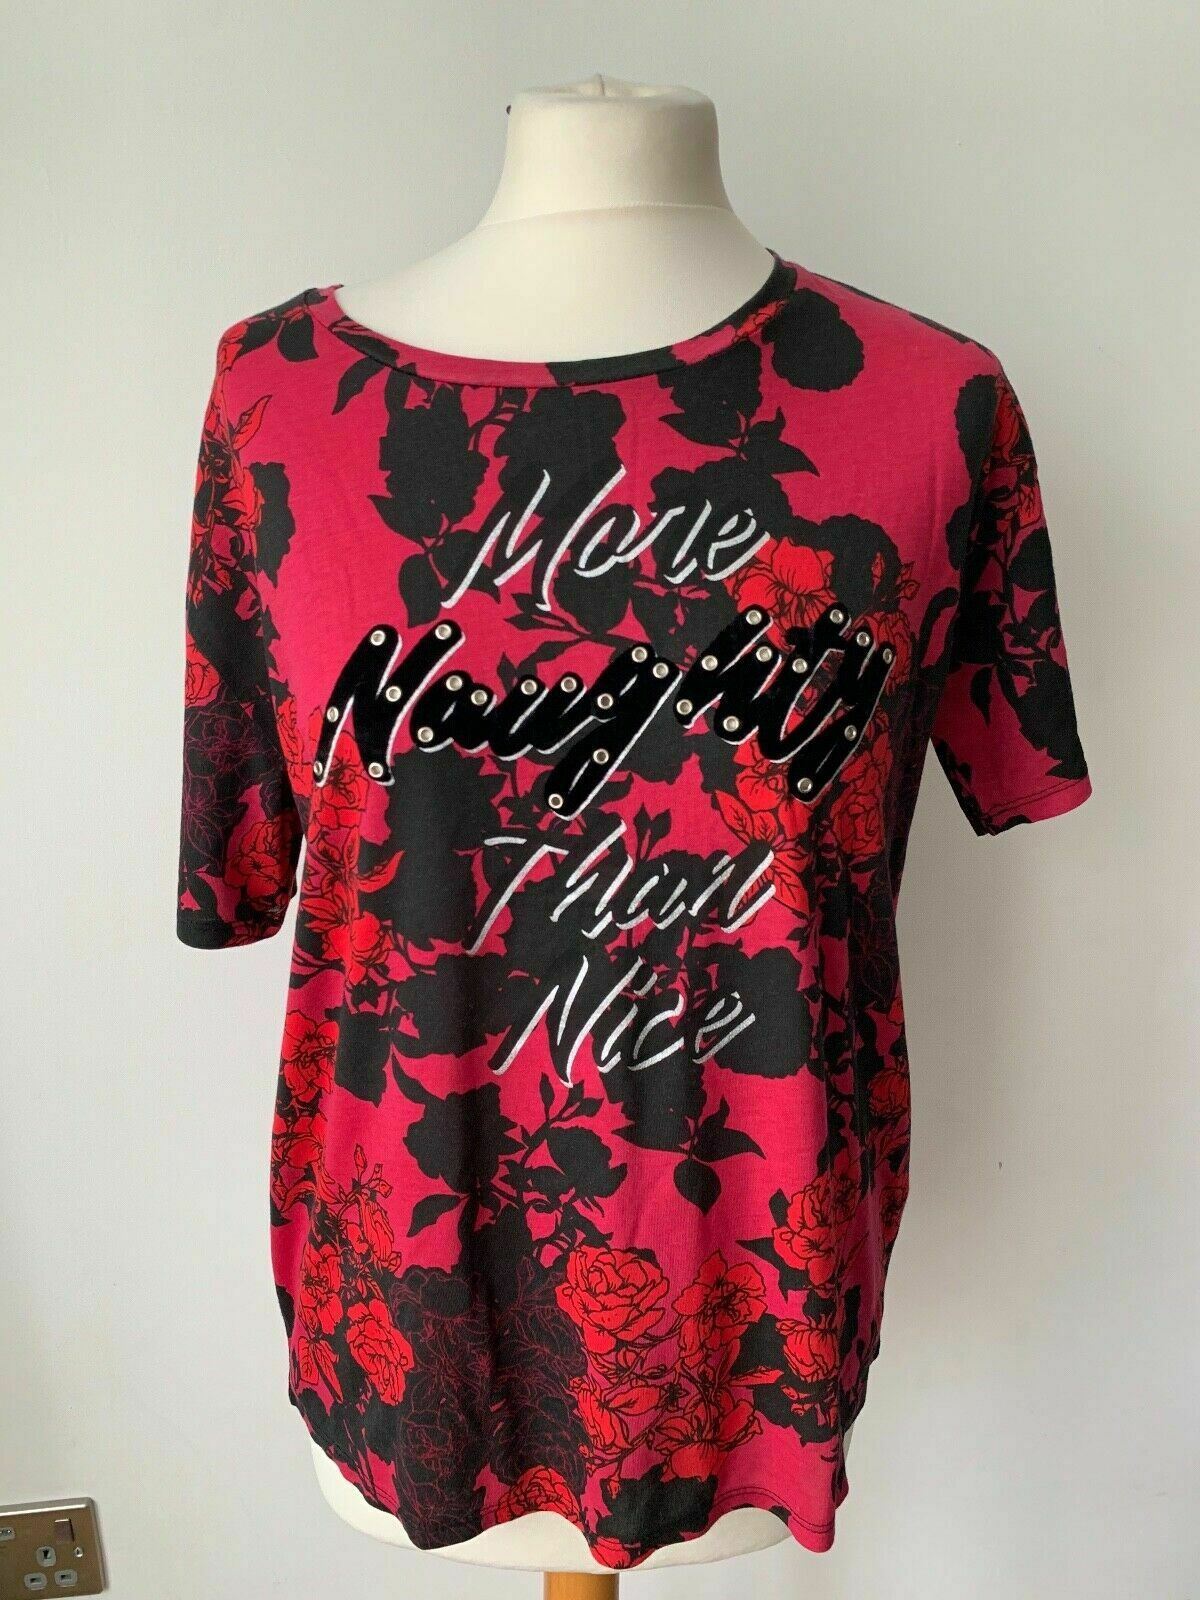 Guess Red Black Roses T-Shirt Slogan Size 8 (M)